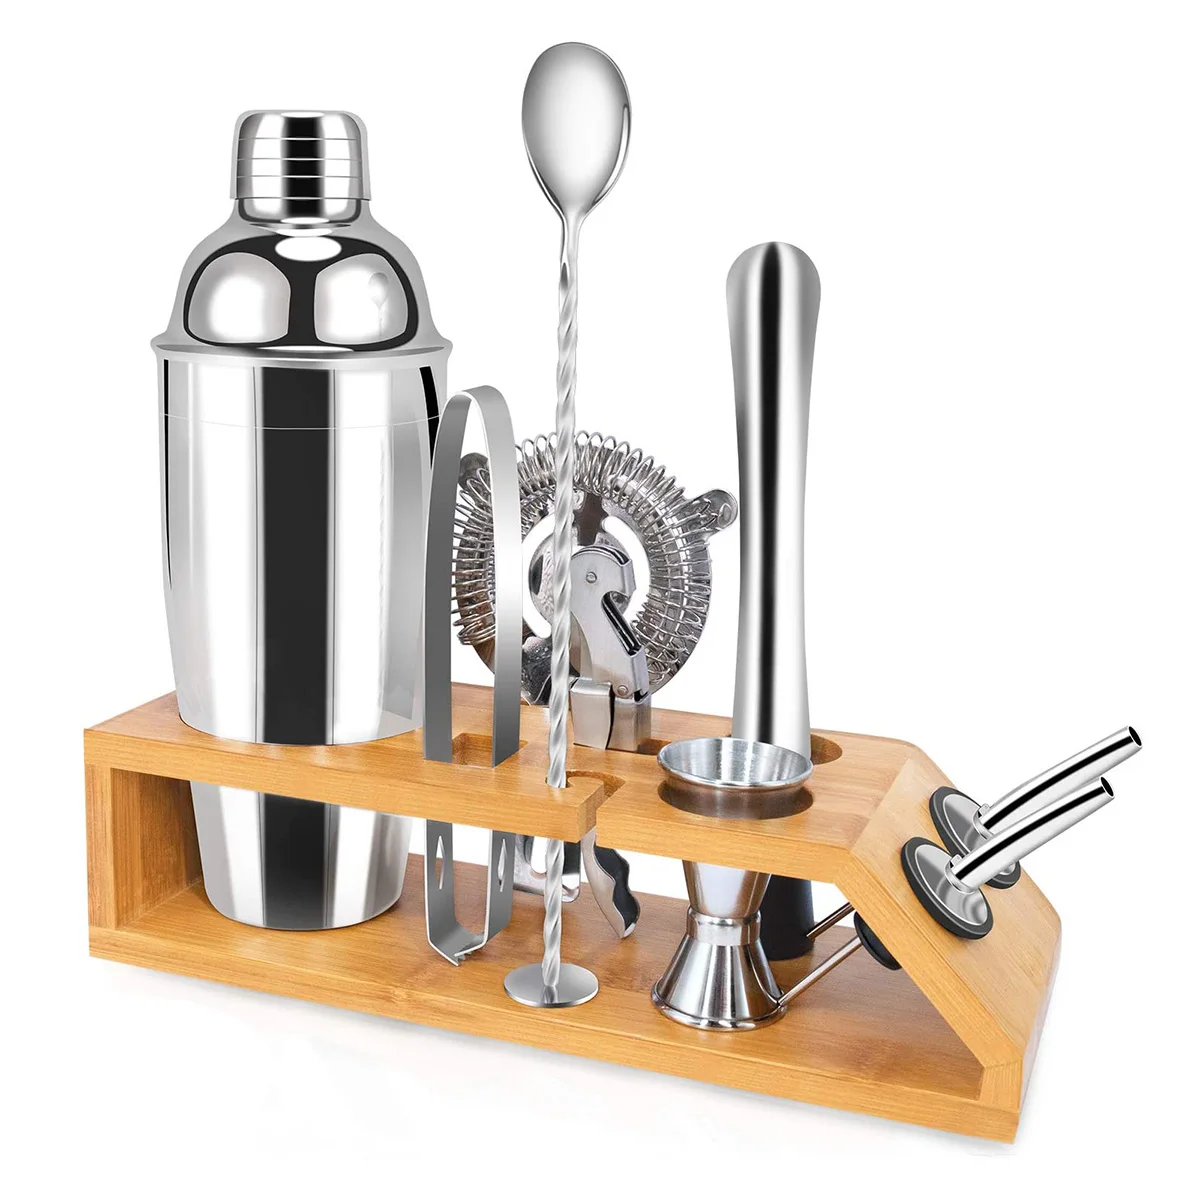 

Customize Premium 550ml/750ml Bartenders Measuring Jigger Mixing Boston Stainless Steel Cocktail Shaker Kit With Bamboo Stand, Silver,customizable